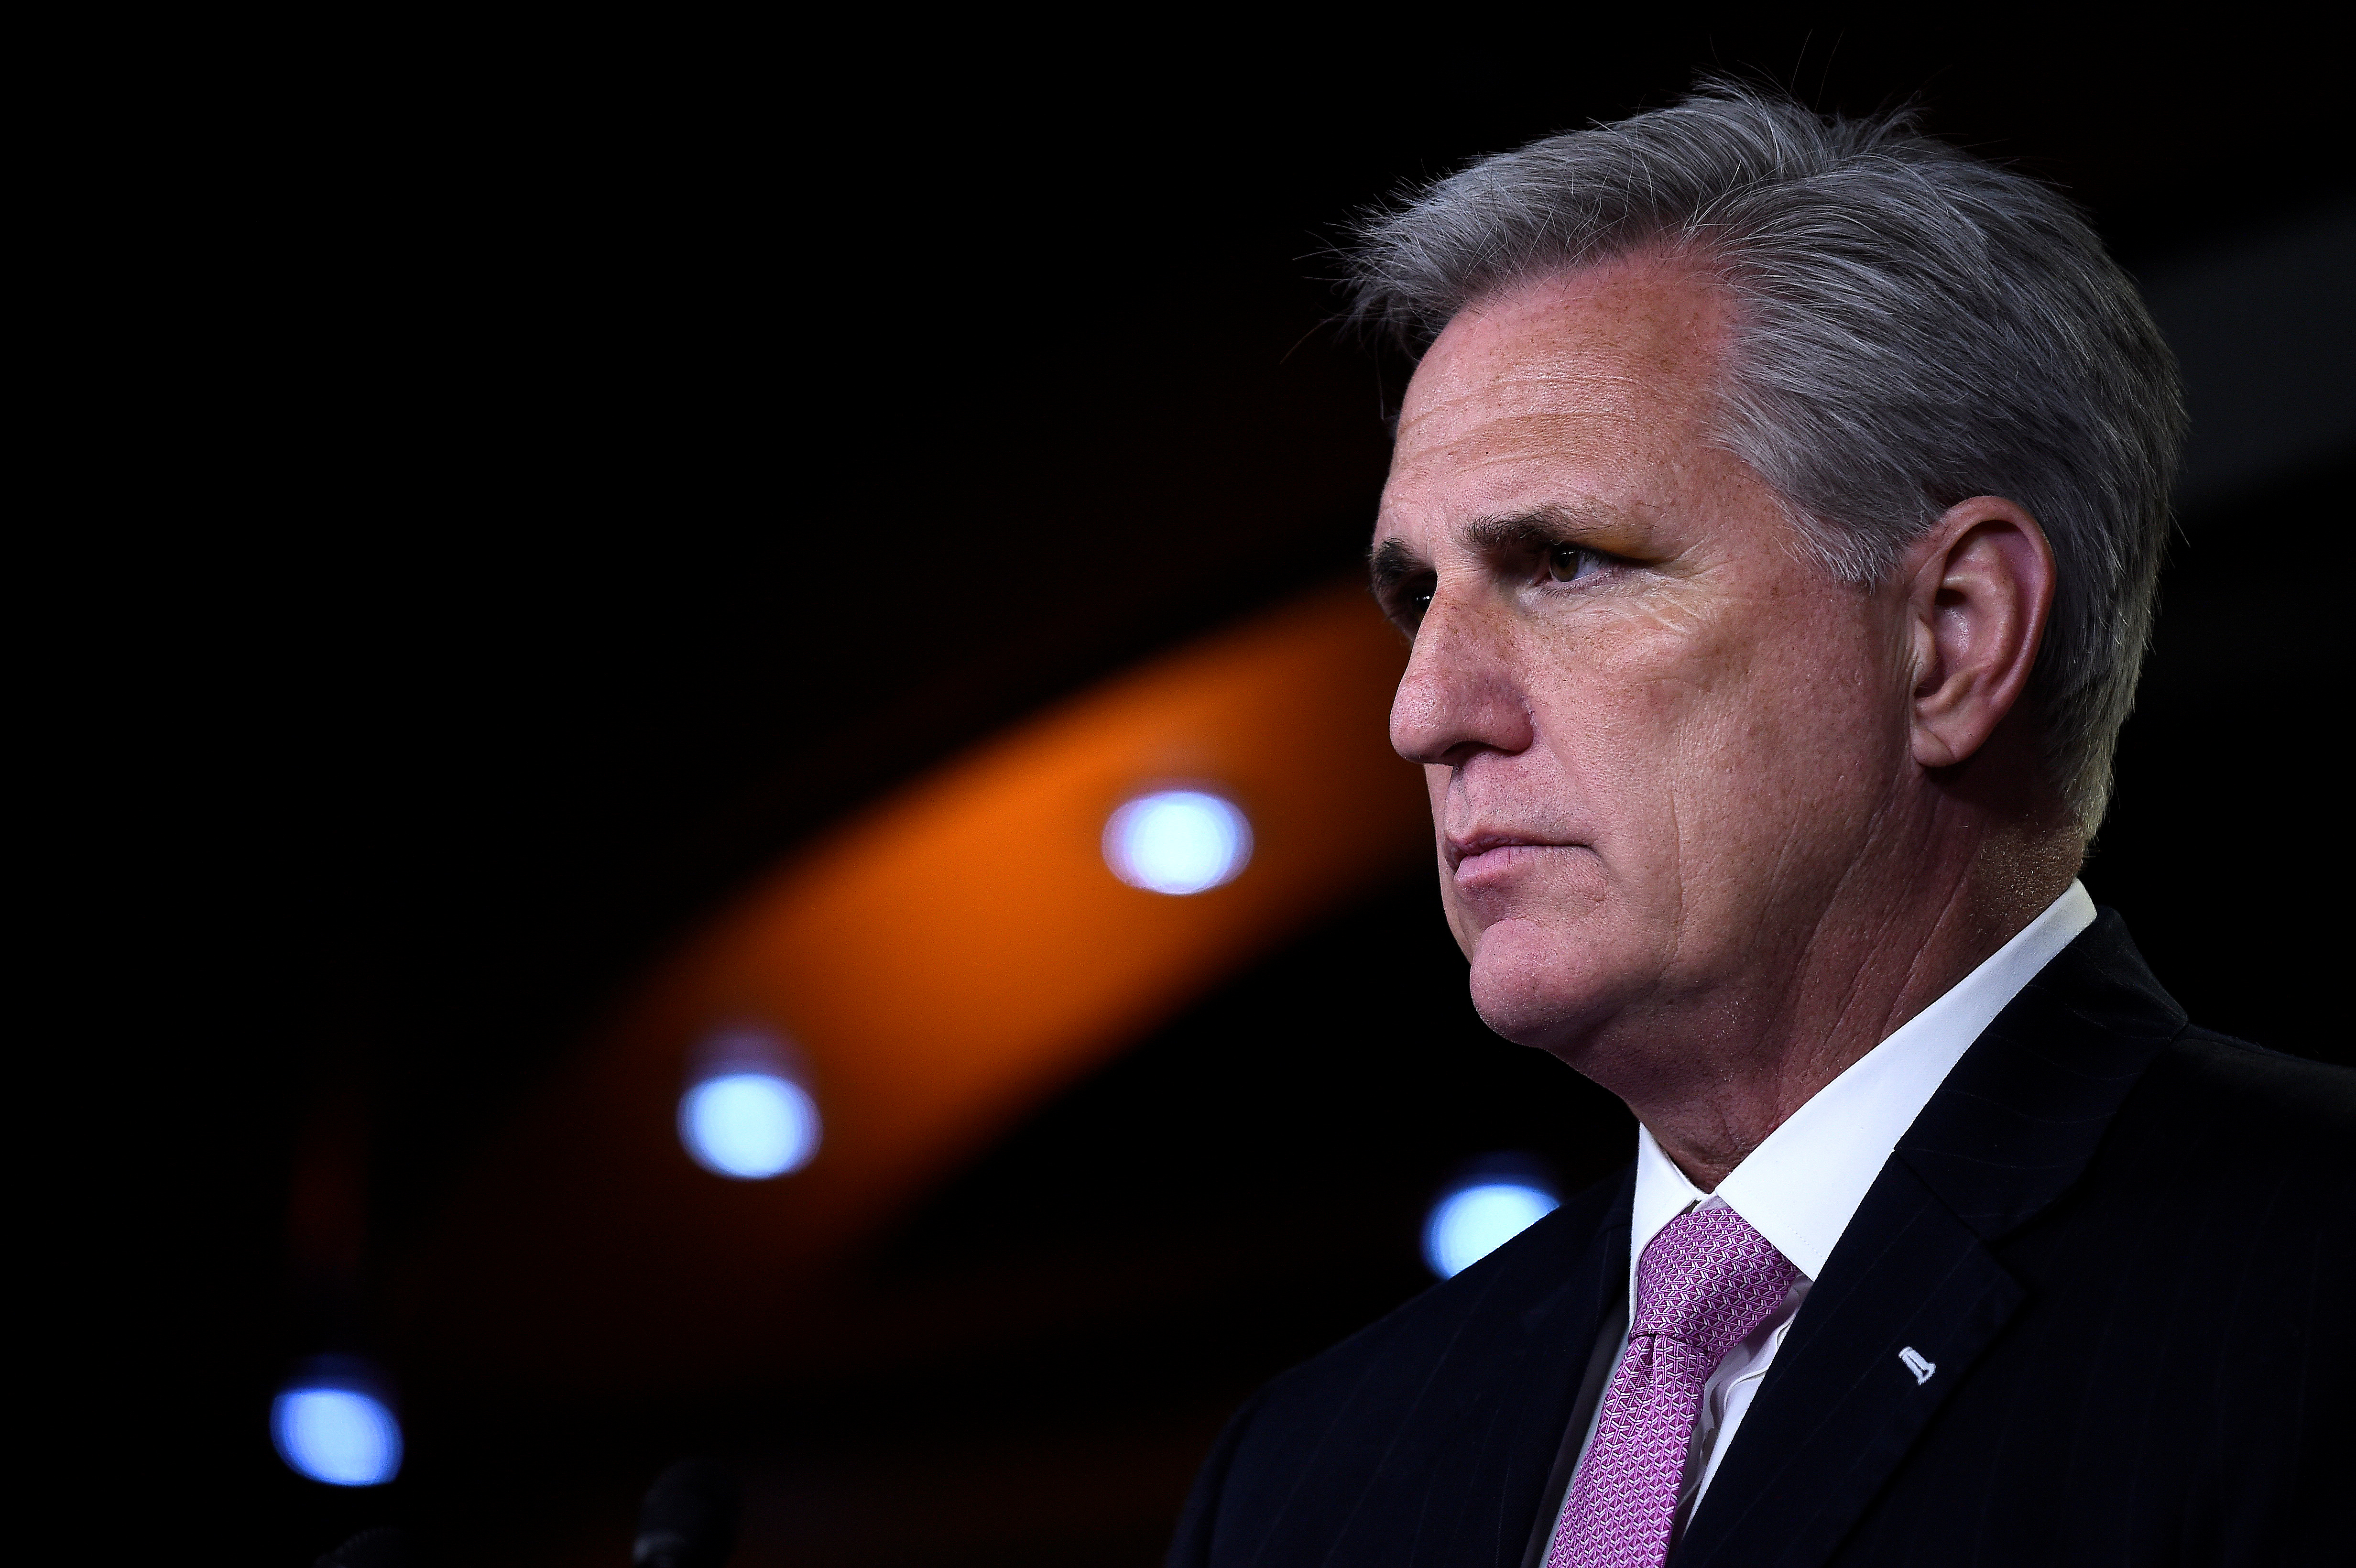 House Minority Leader Kevin McCarthy (R-CA) speaks to the media on Capitol Hill in Washington